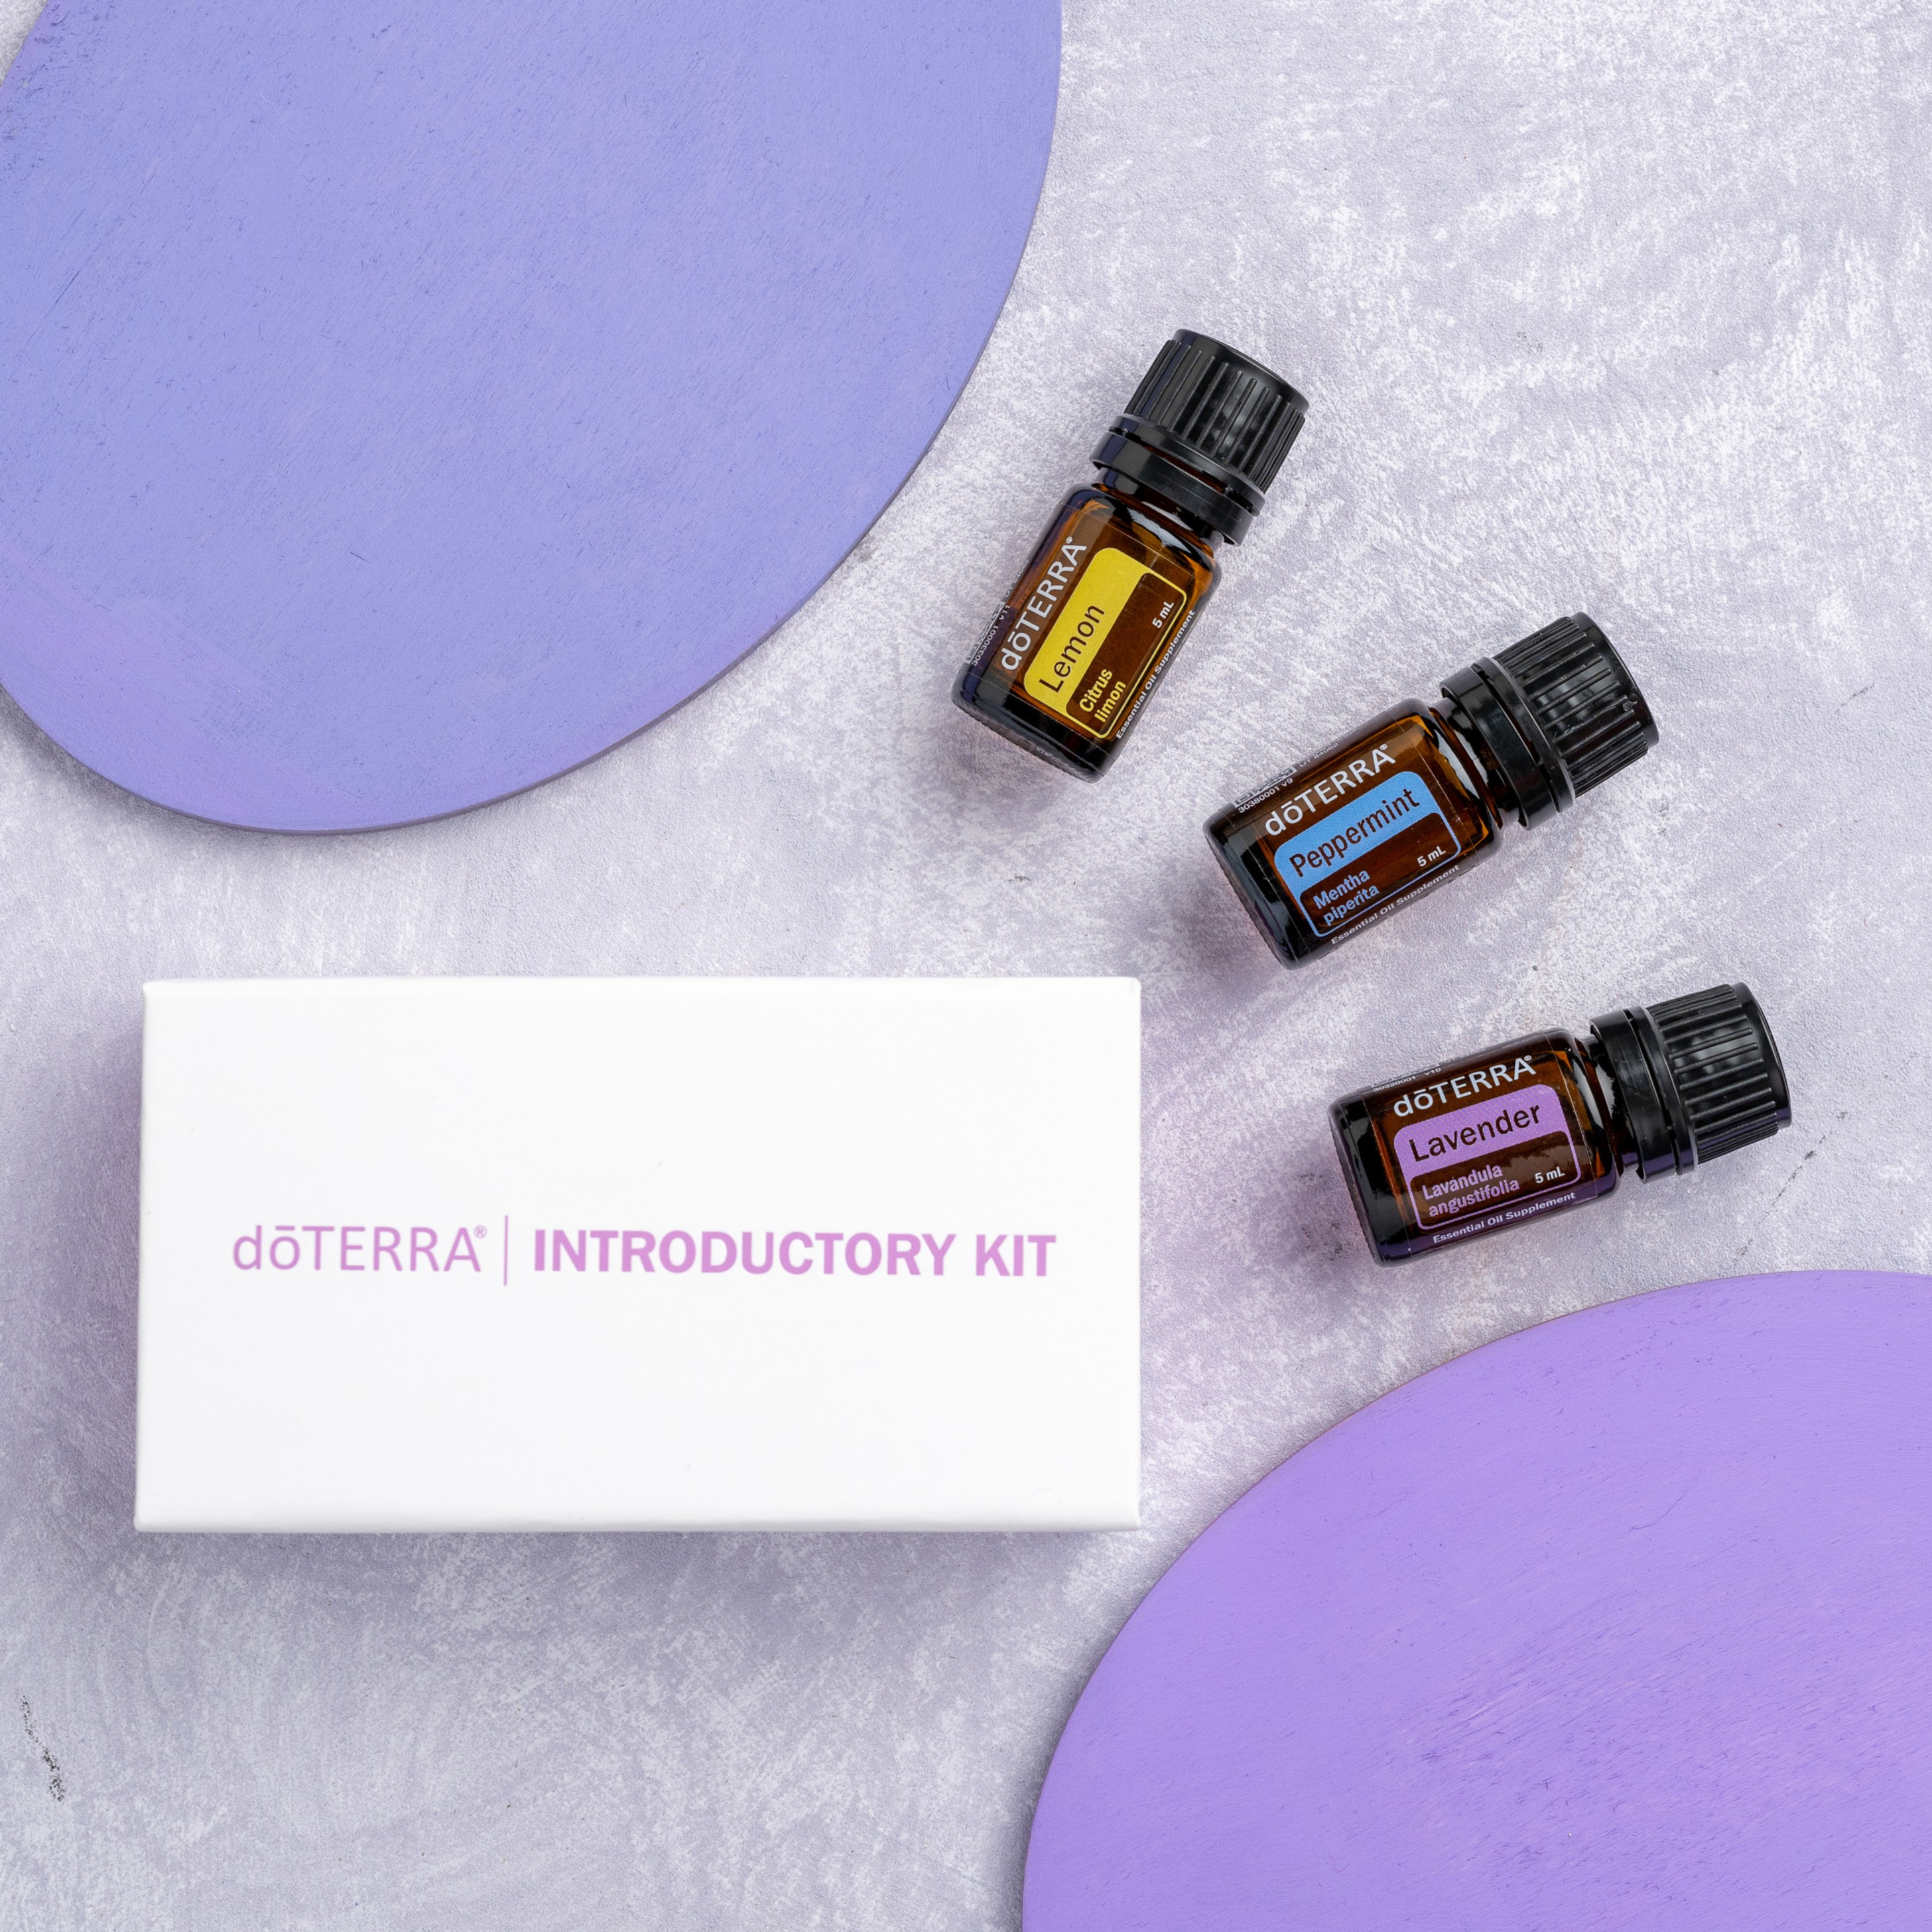 click here to learn more about doTERRA